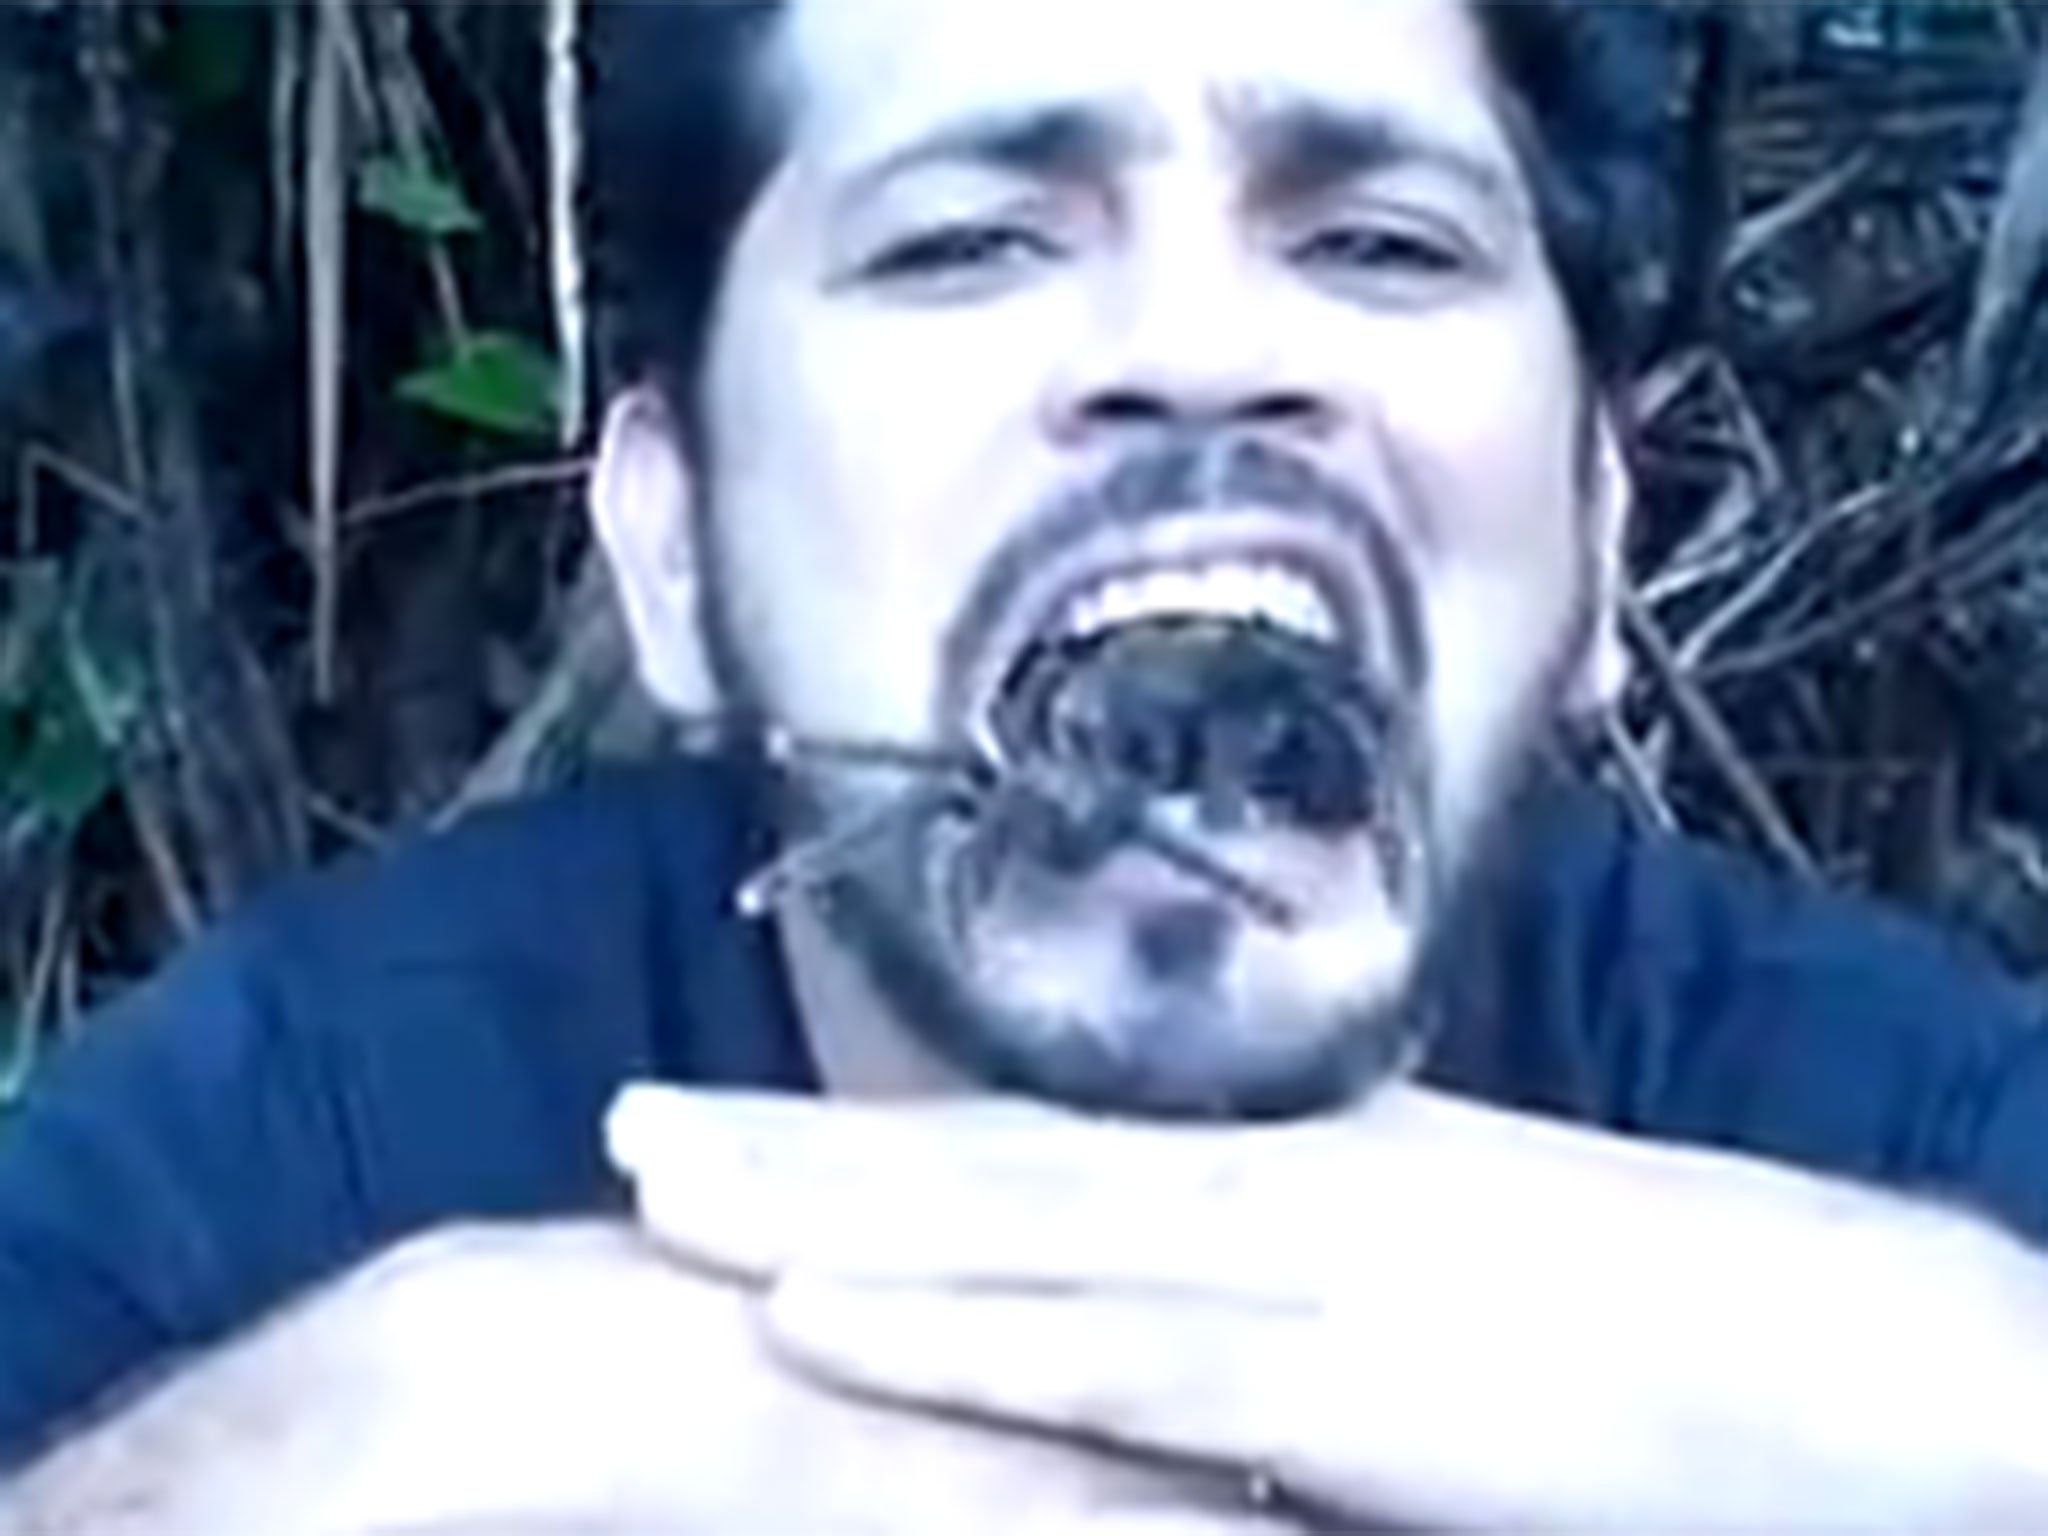 Arteval Duarte released a video that showed him placing three tarantulas in his mouth earlier this month